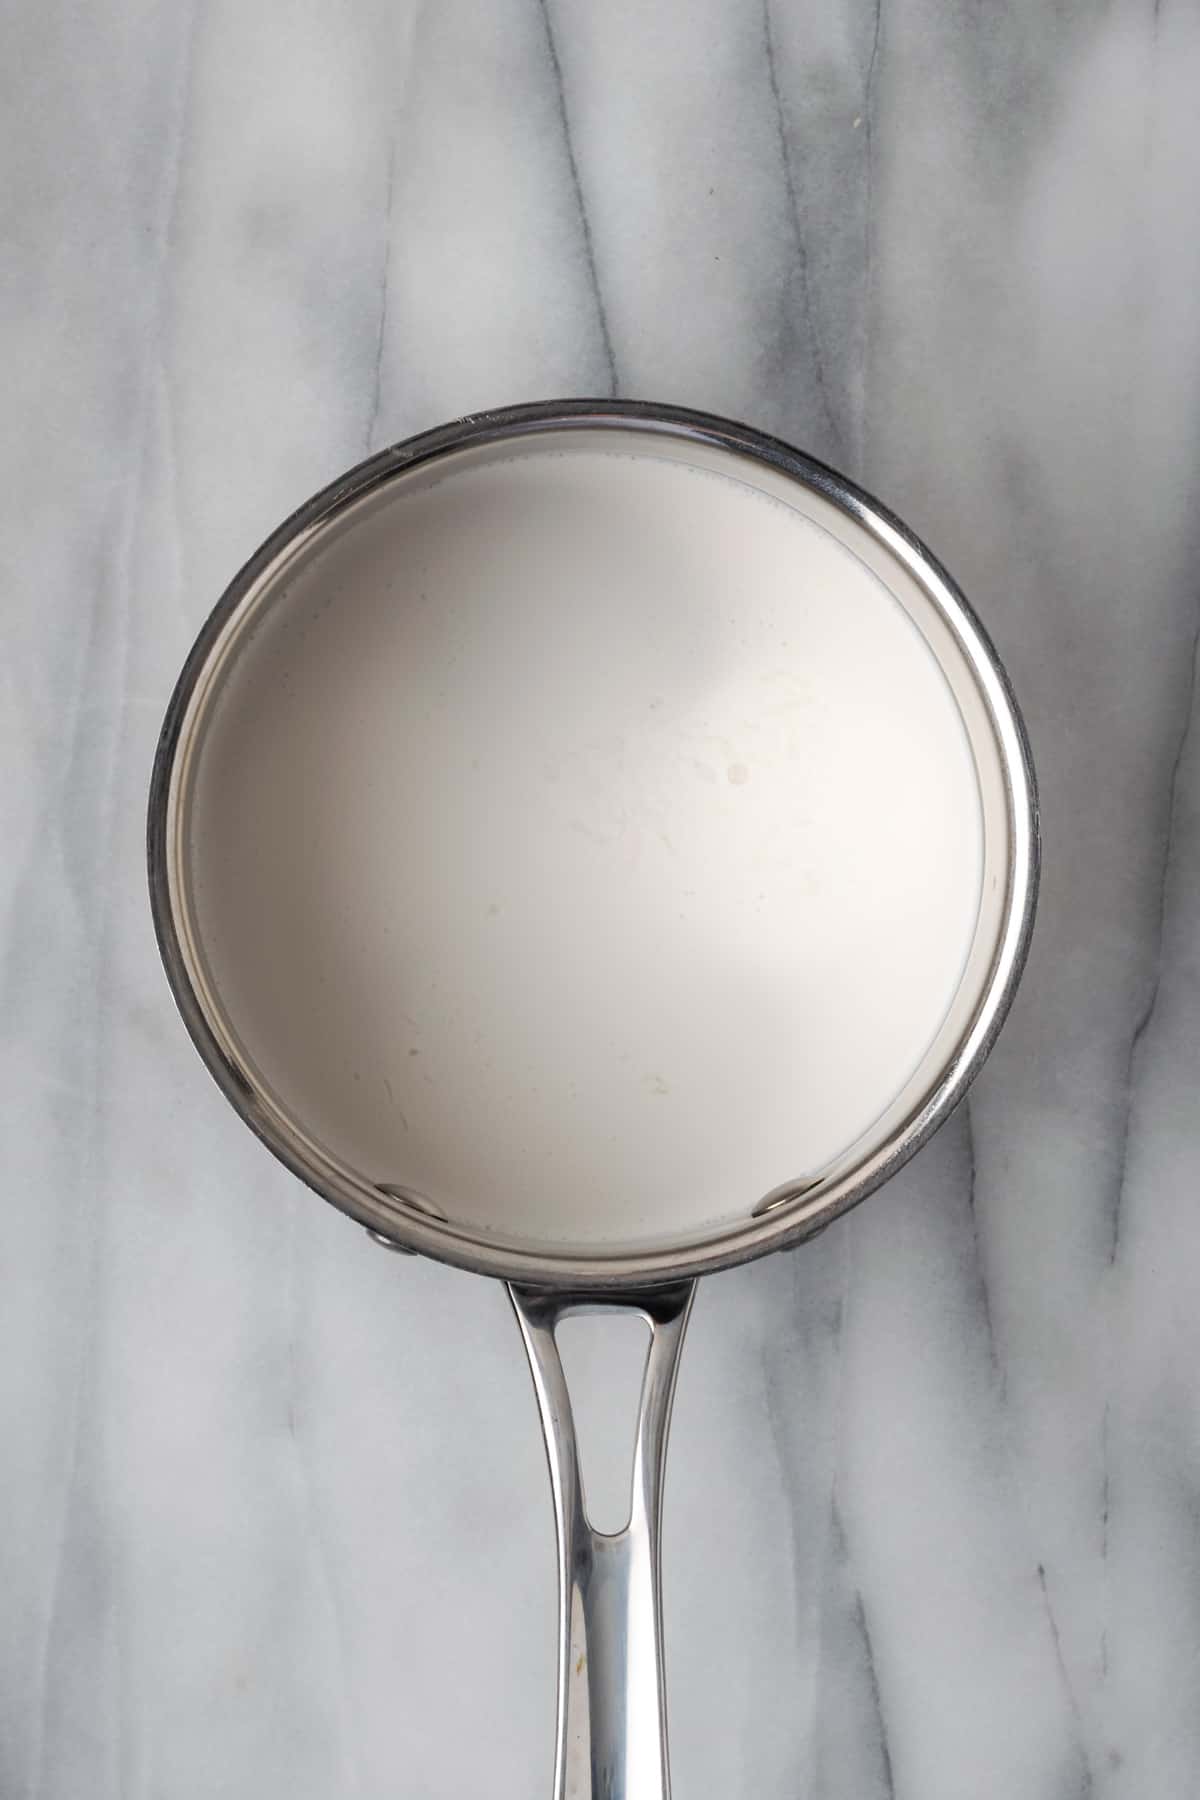 A small saucepan being used to heat heavy cream.